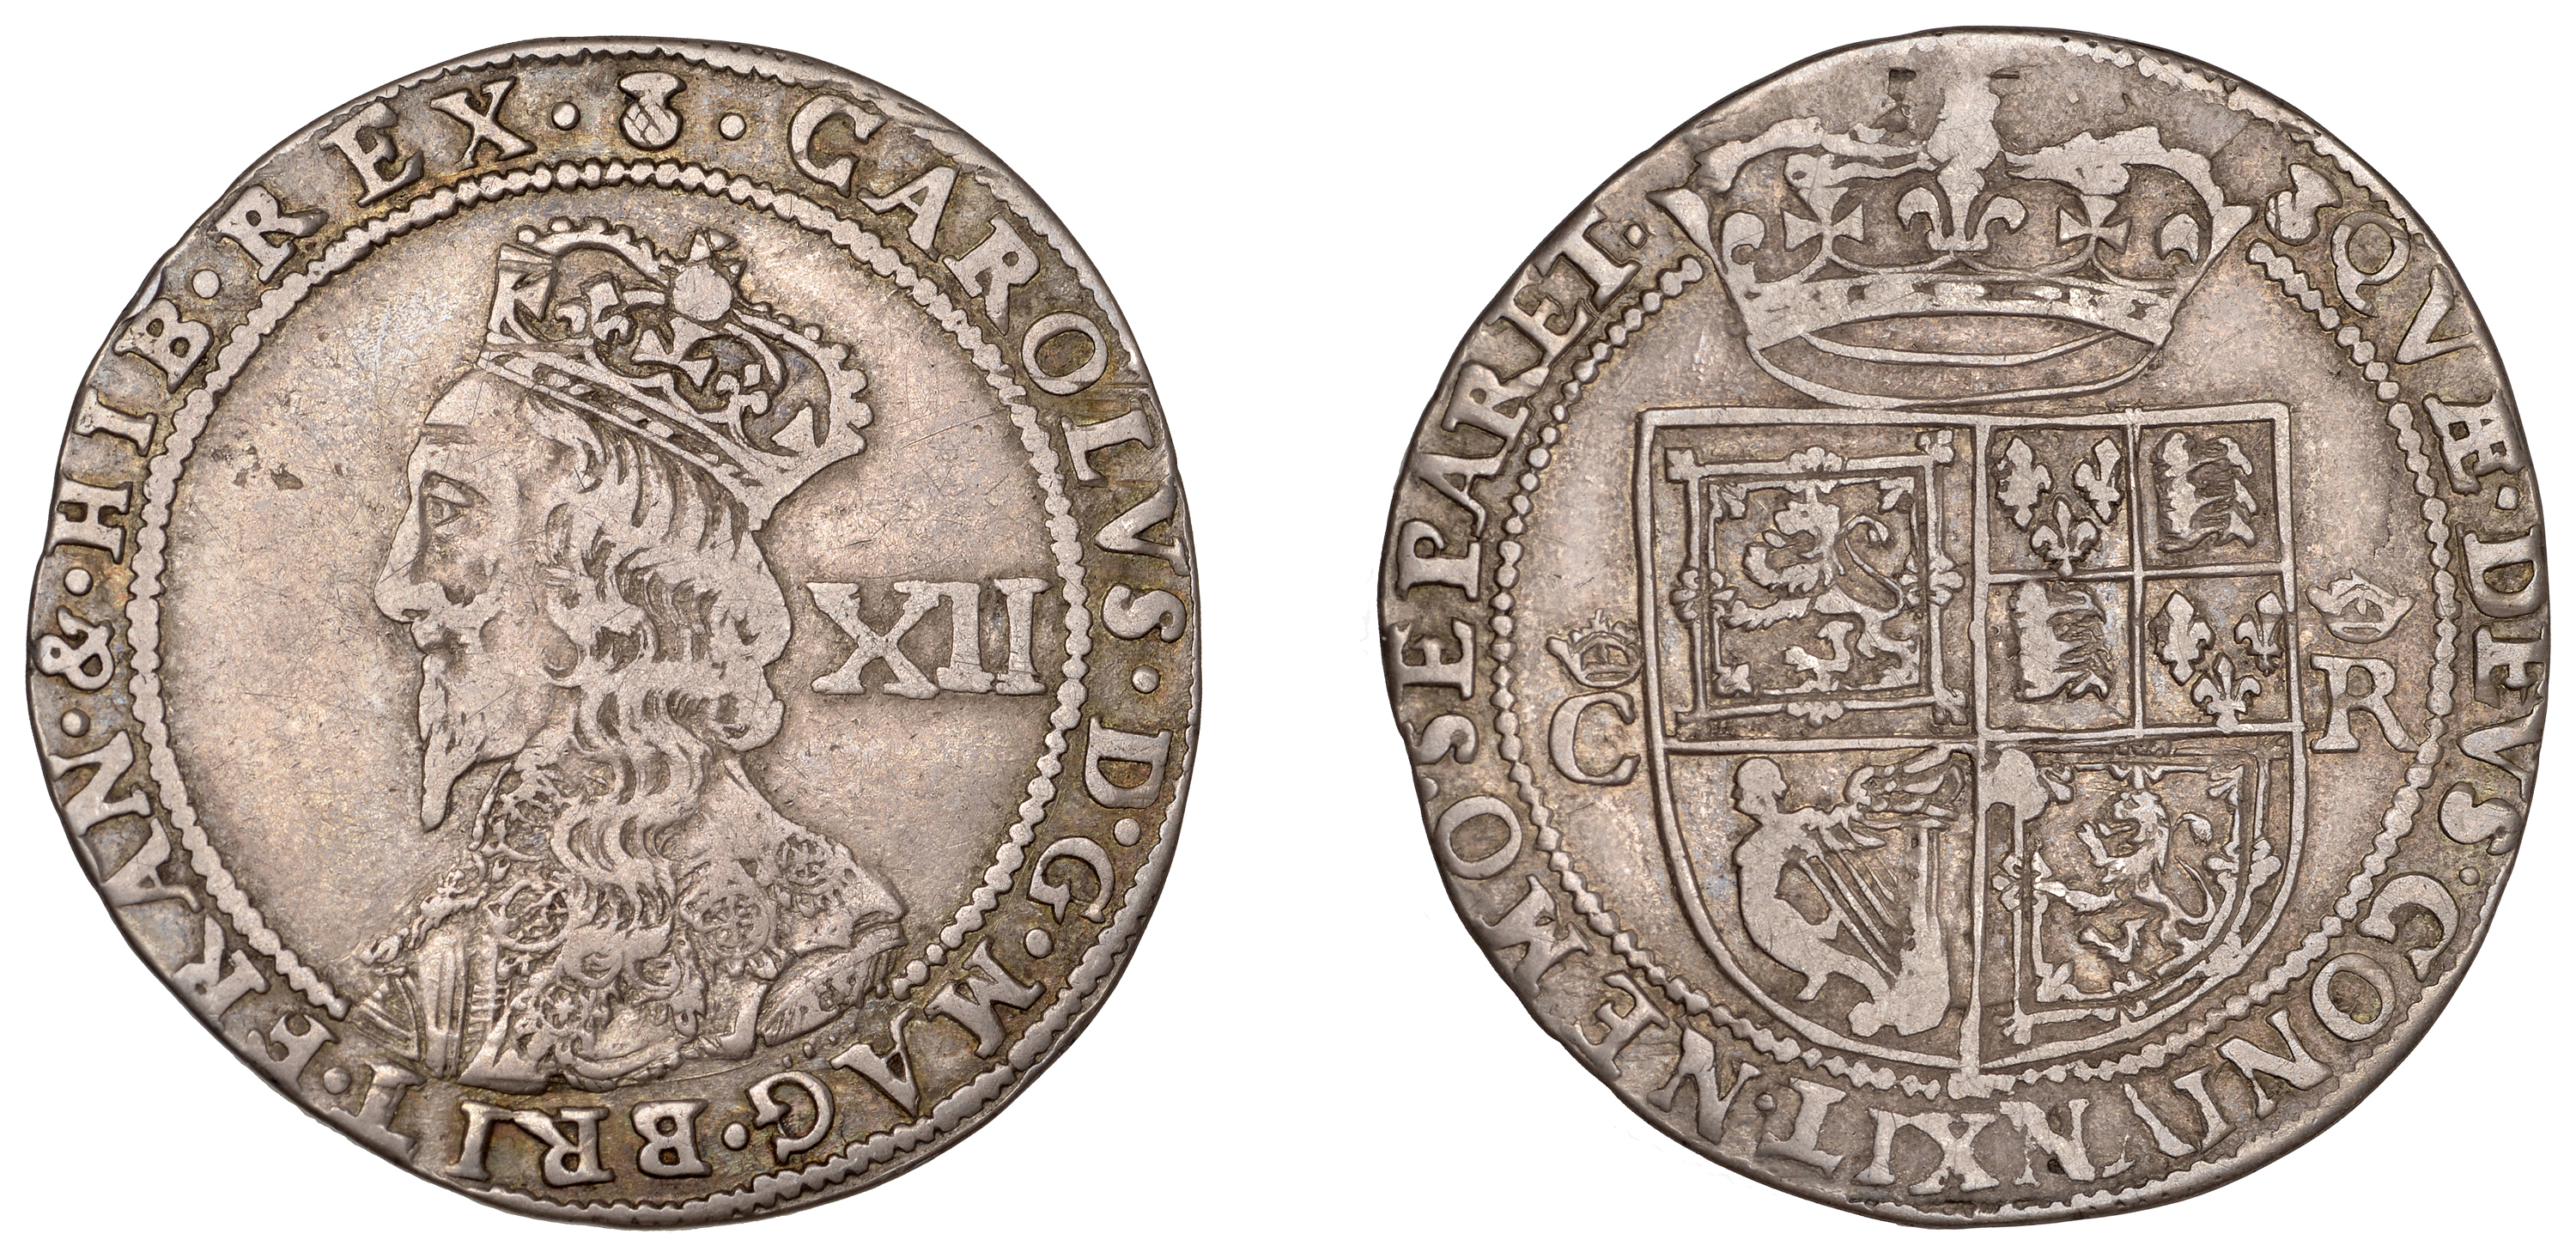 Charles I (1625-1649), Third coinage, Falconer's Anonymous issue, Twelve Shillings, mm. this...